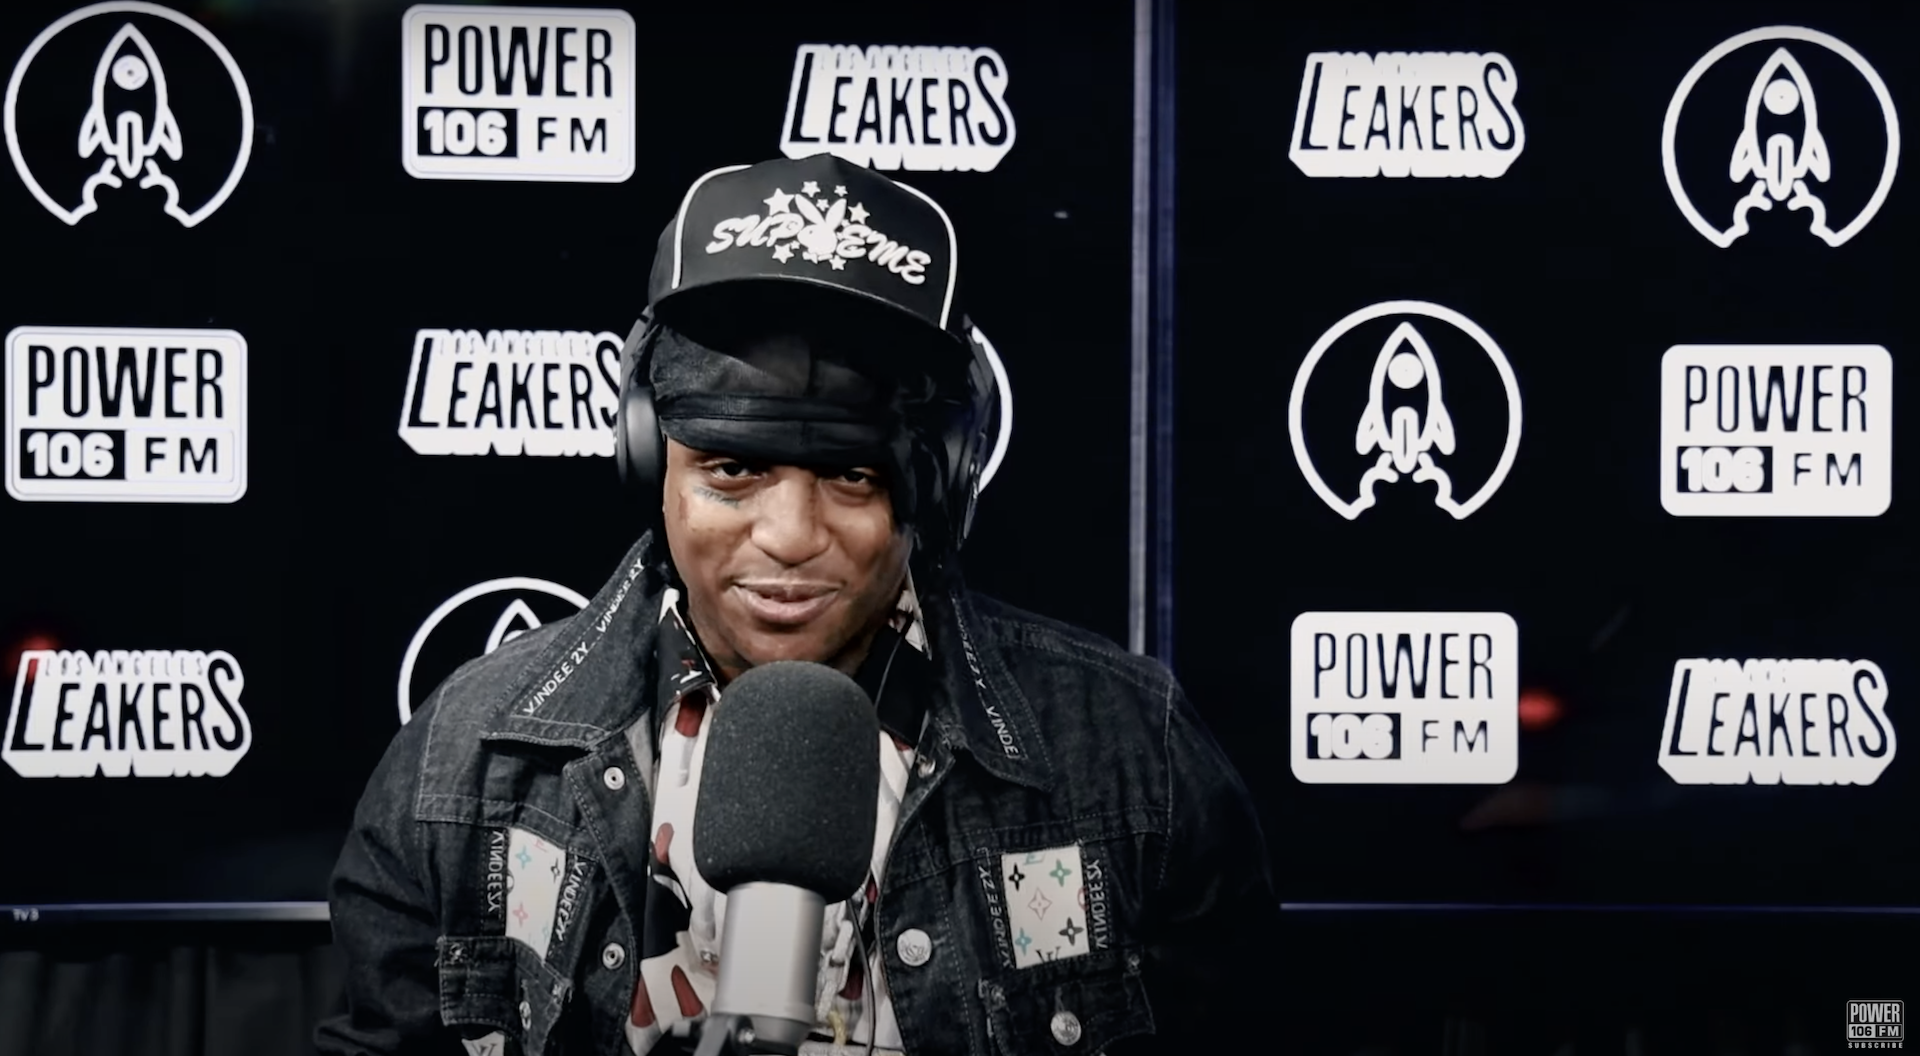 Watch Ski Mask the Slump God Freestyle Over Busta Rhymes’ “Put Your Hands Where My Eyes Could See”